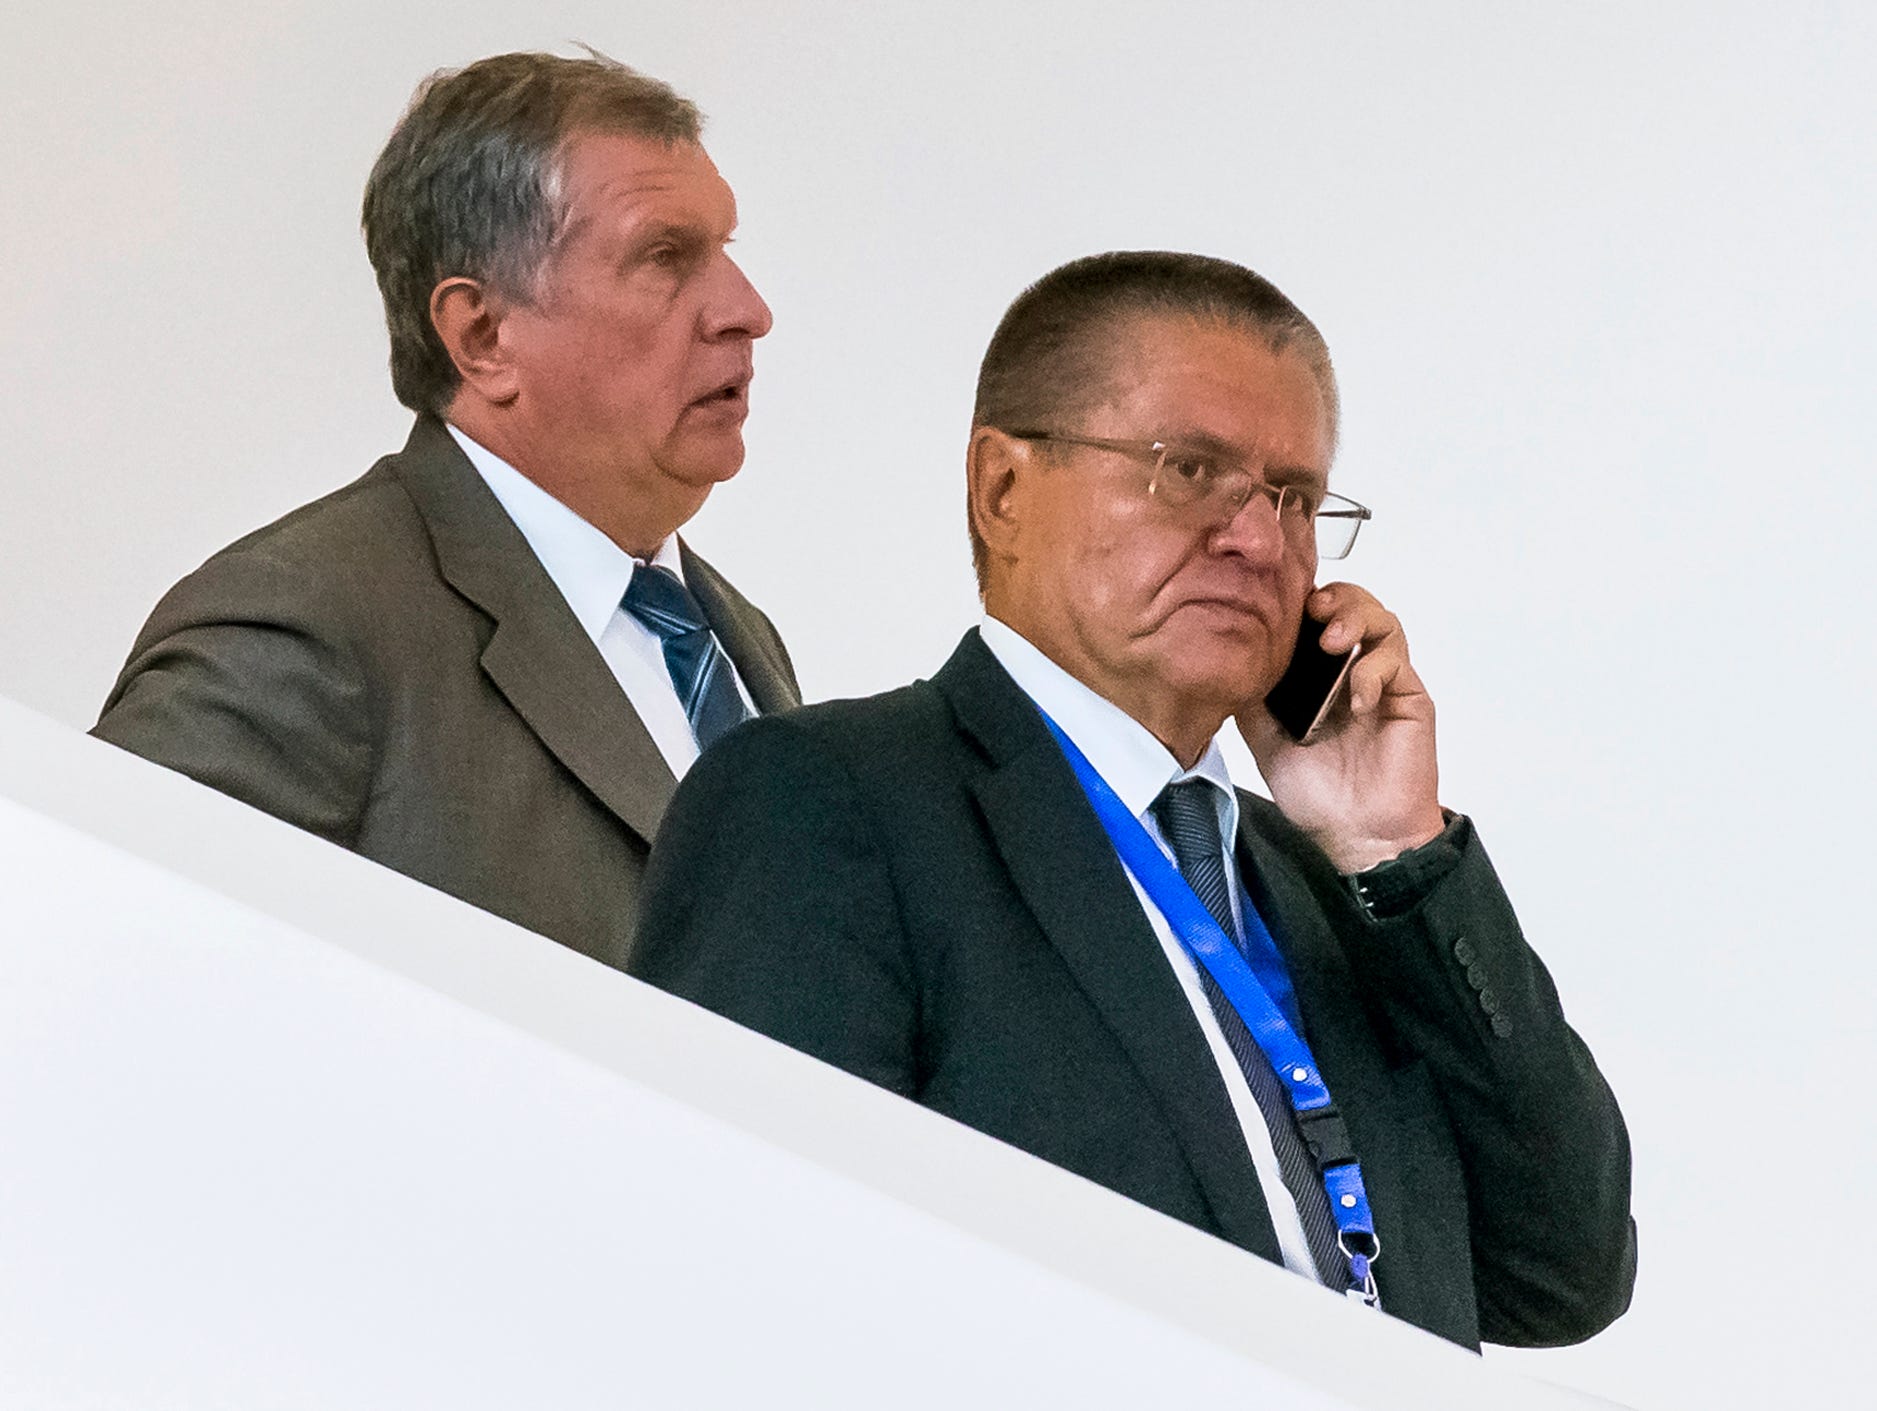 In this Monday, Aug. 8, 2016 photo, Economic Development Minister Alexei Ulyukayev, right, speaks on a mobile phone as he attends a meeting with Rosneft CEO Igor Sechin, left, in Baku, Azerbaijan.